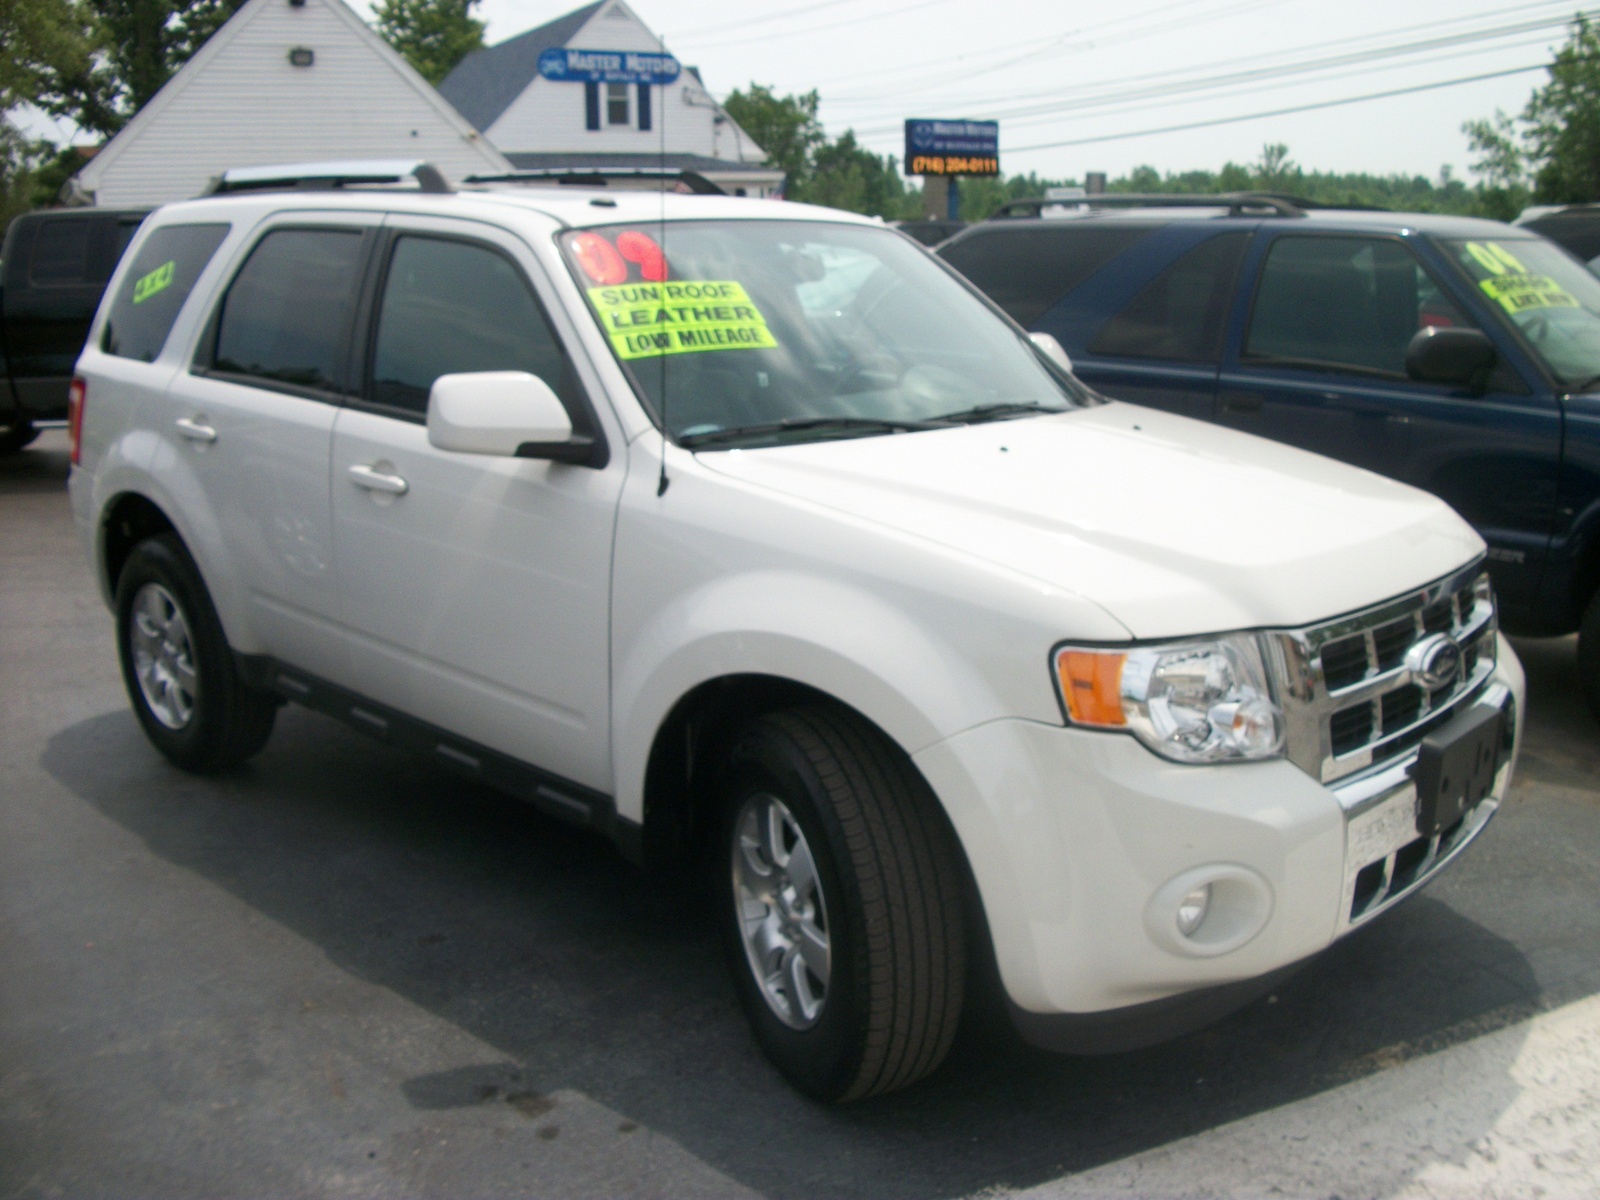 2009 Ford escape rollover rating #2